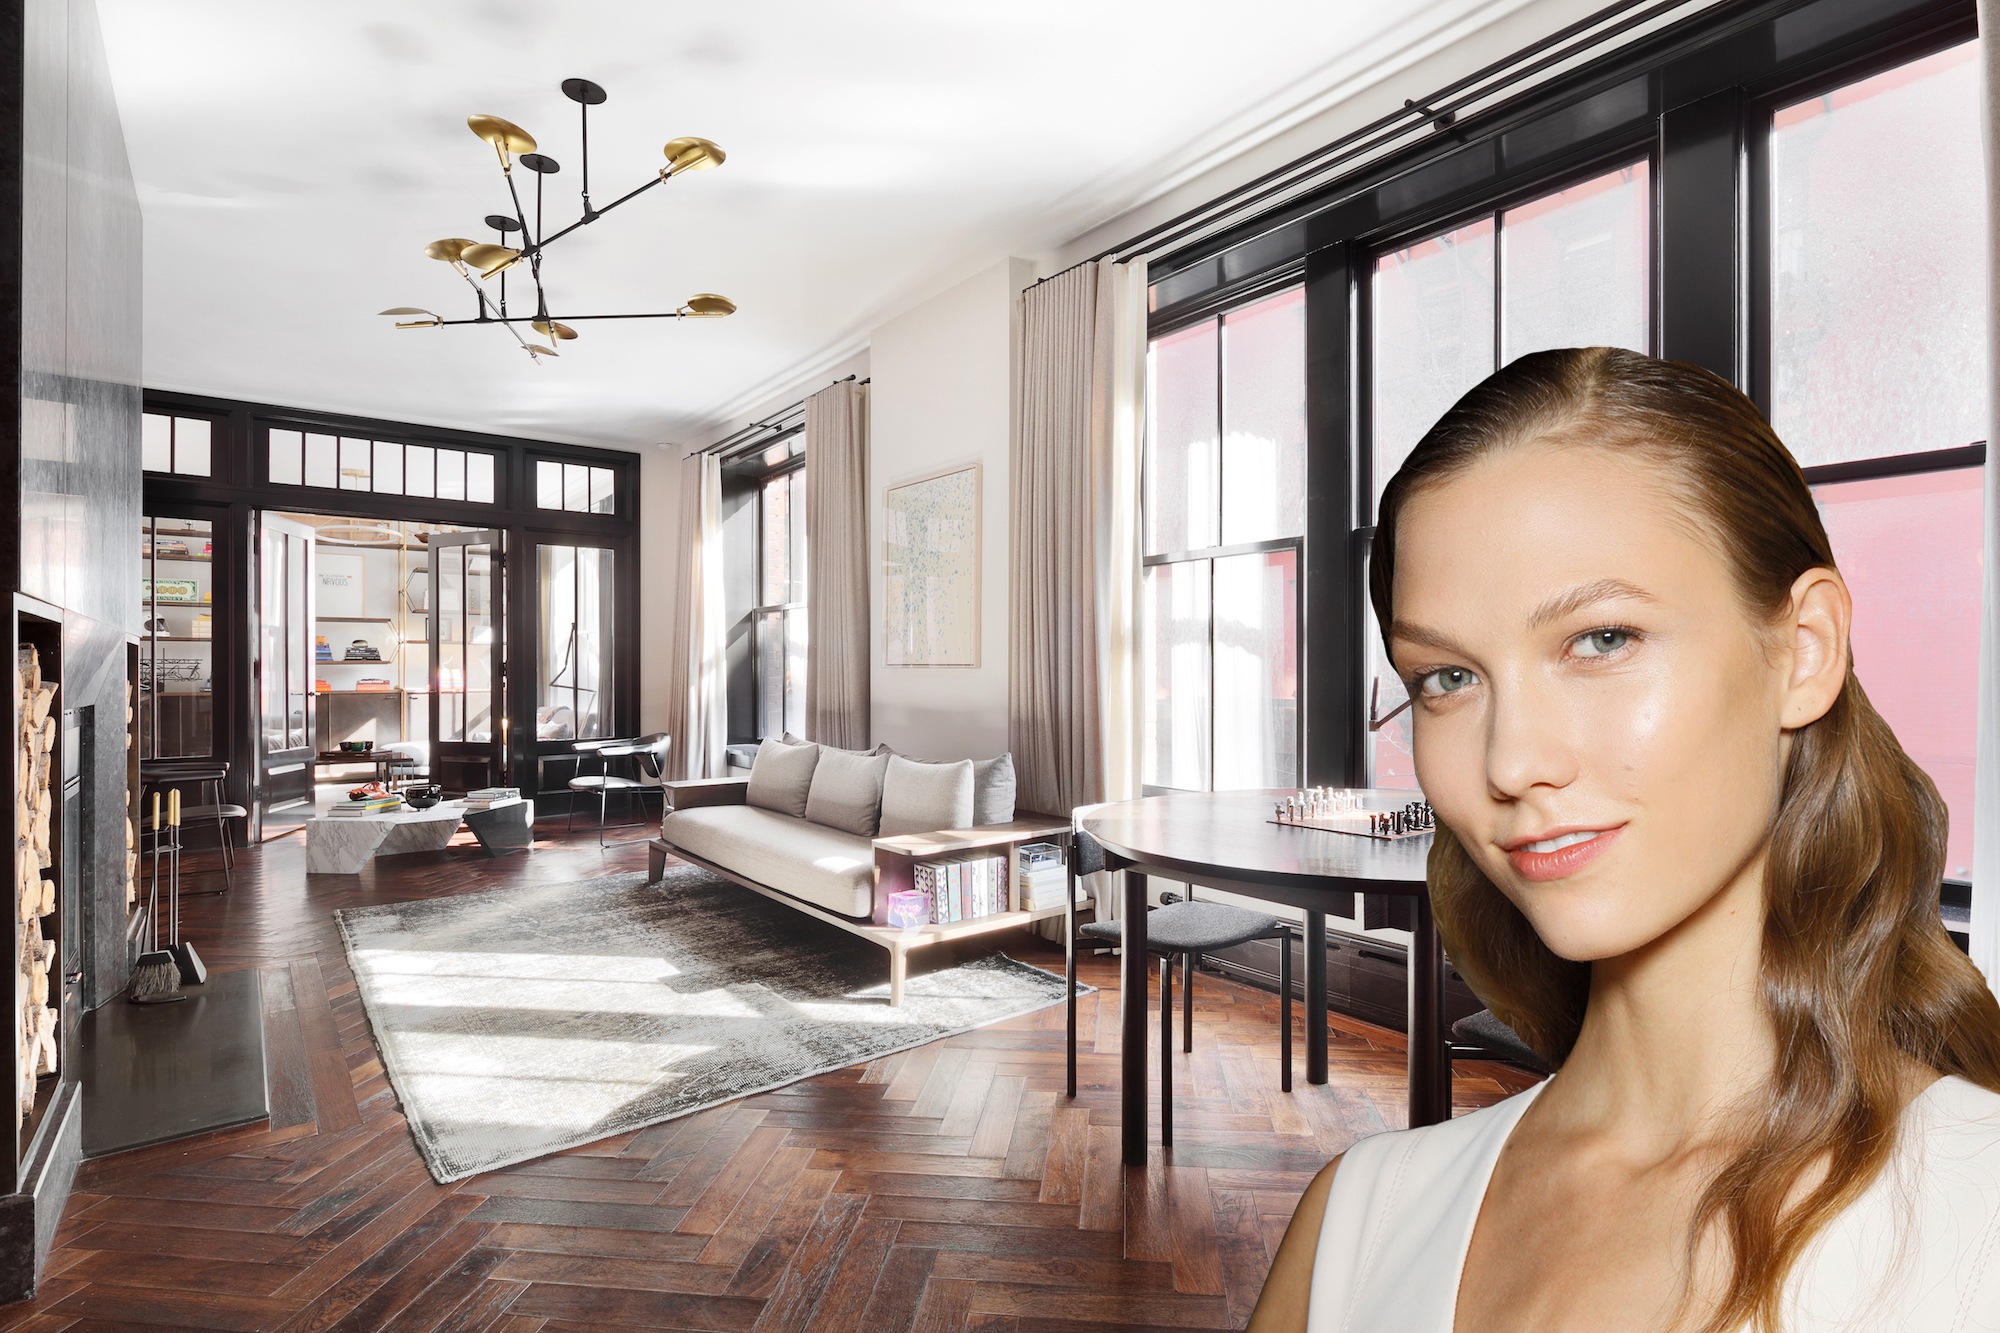 Karlie Kloss and Joshua Kushner just put their Nolita condo on the market for $7M